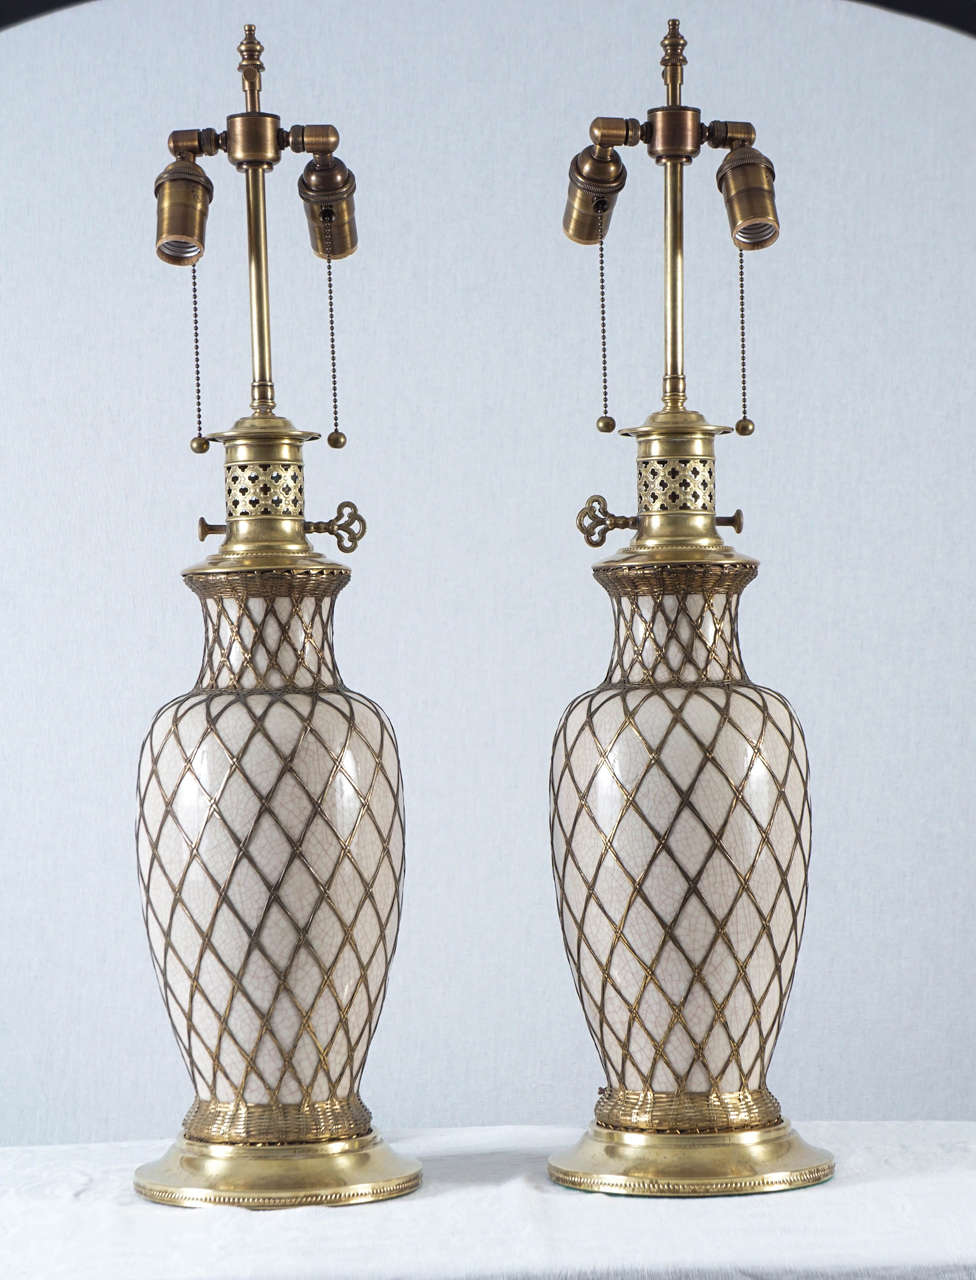 This very nice pair of creamy celadon porcelain lamps is French and mounted with brass tops and bases. The wire work that encases the lamp's is bright and very beautiful. While they look like oil lamp's they are currently wired for electricity.